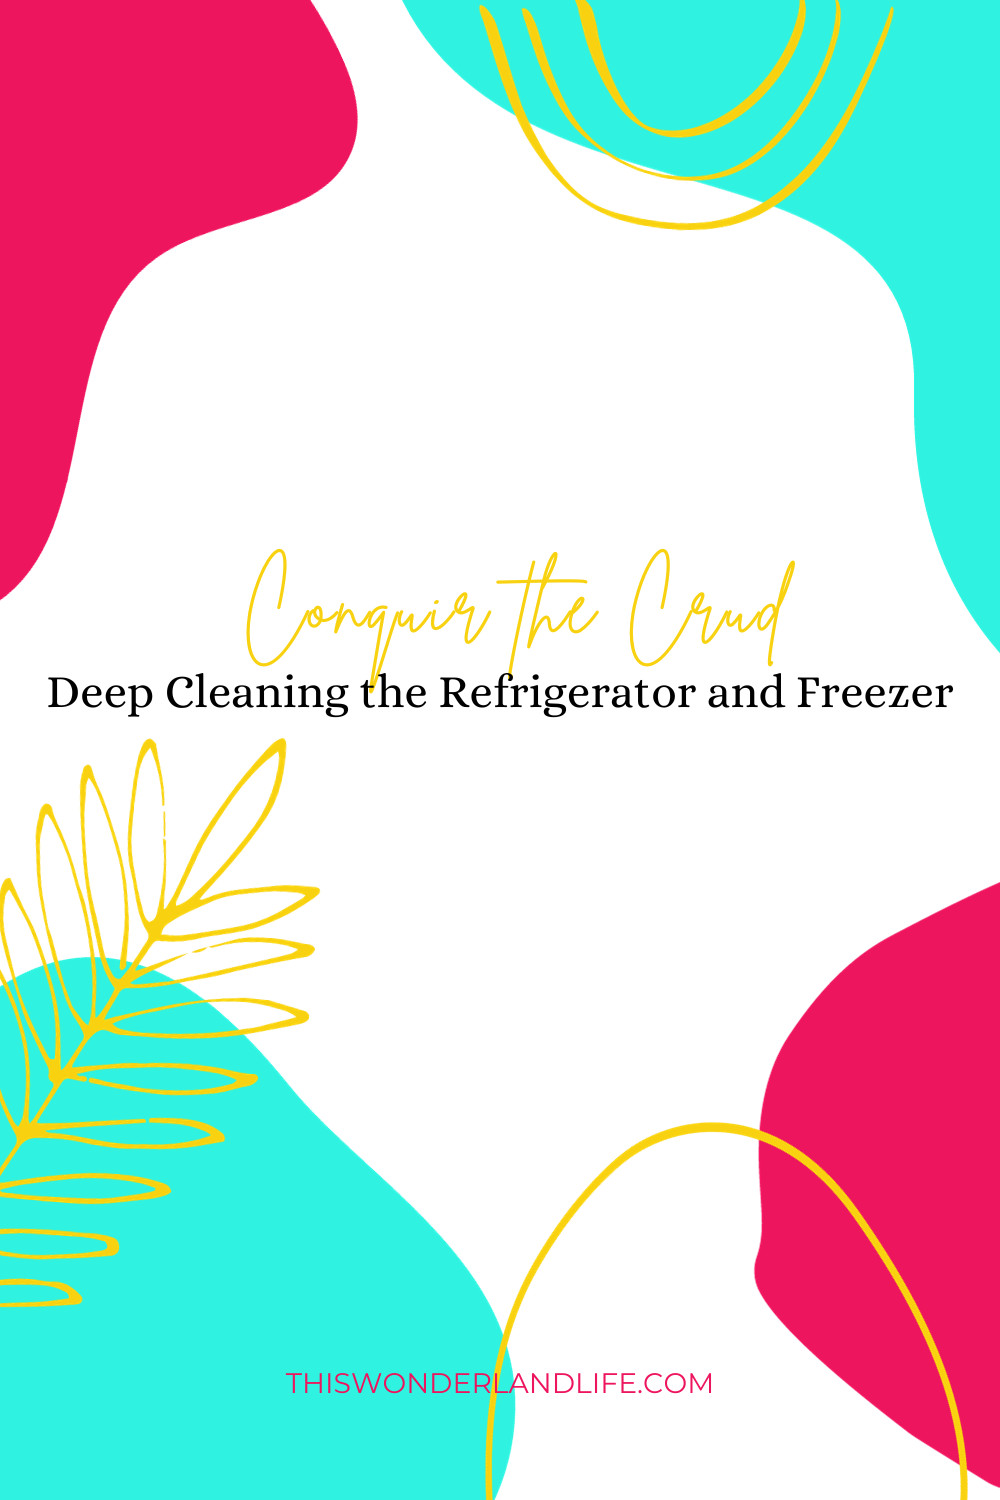 Conquer the crud: Deep cleaning the Refrigerator and Freezer